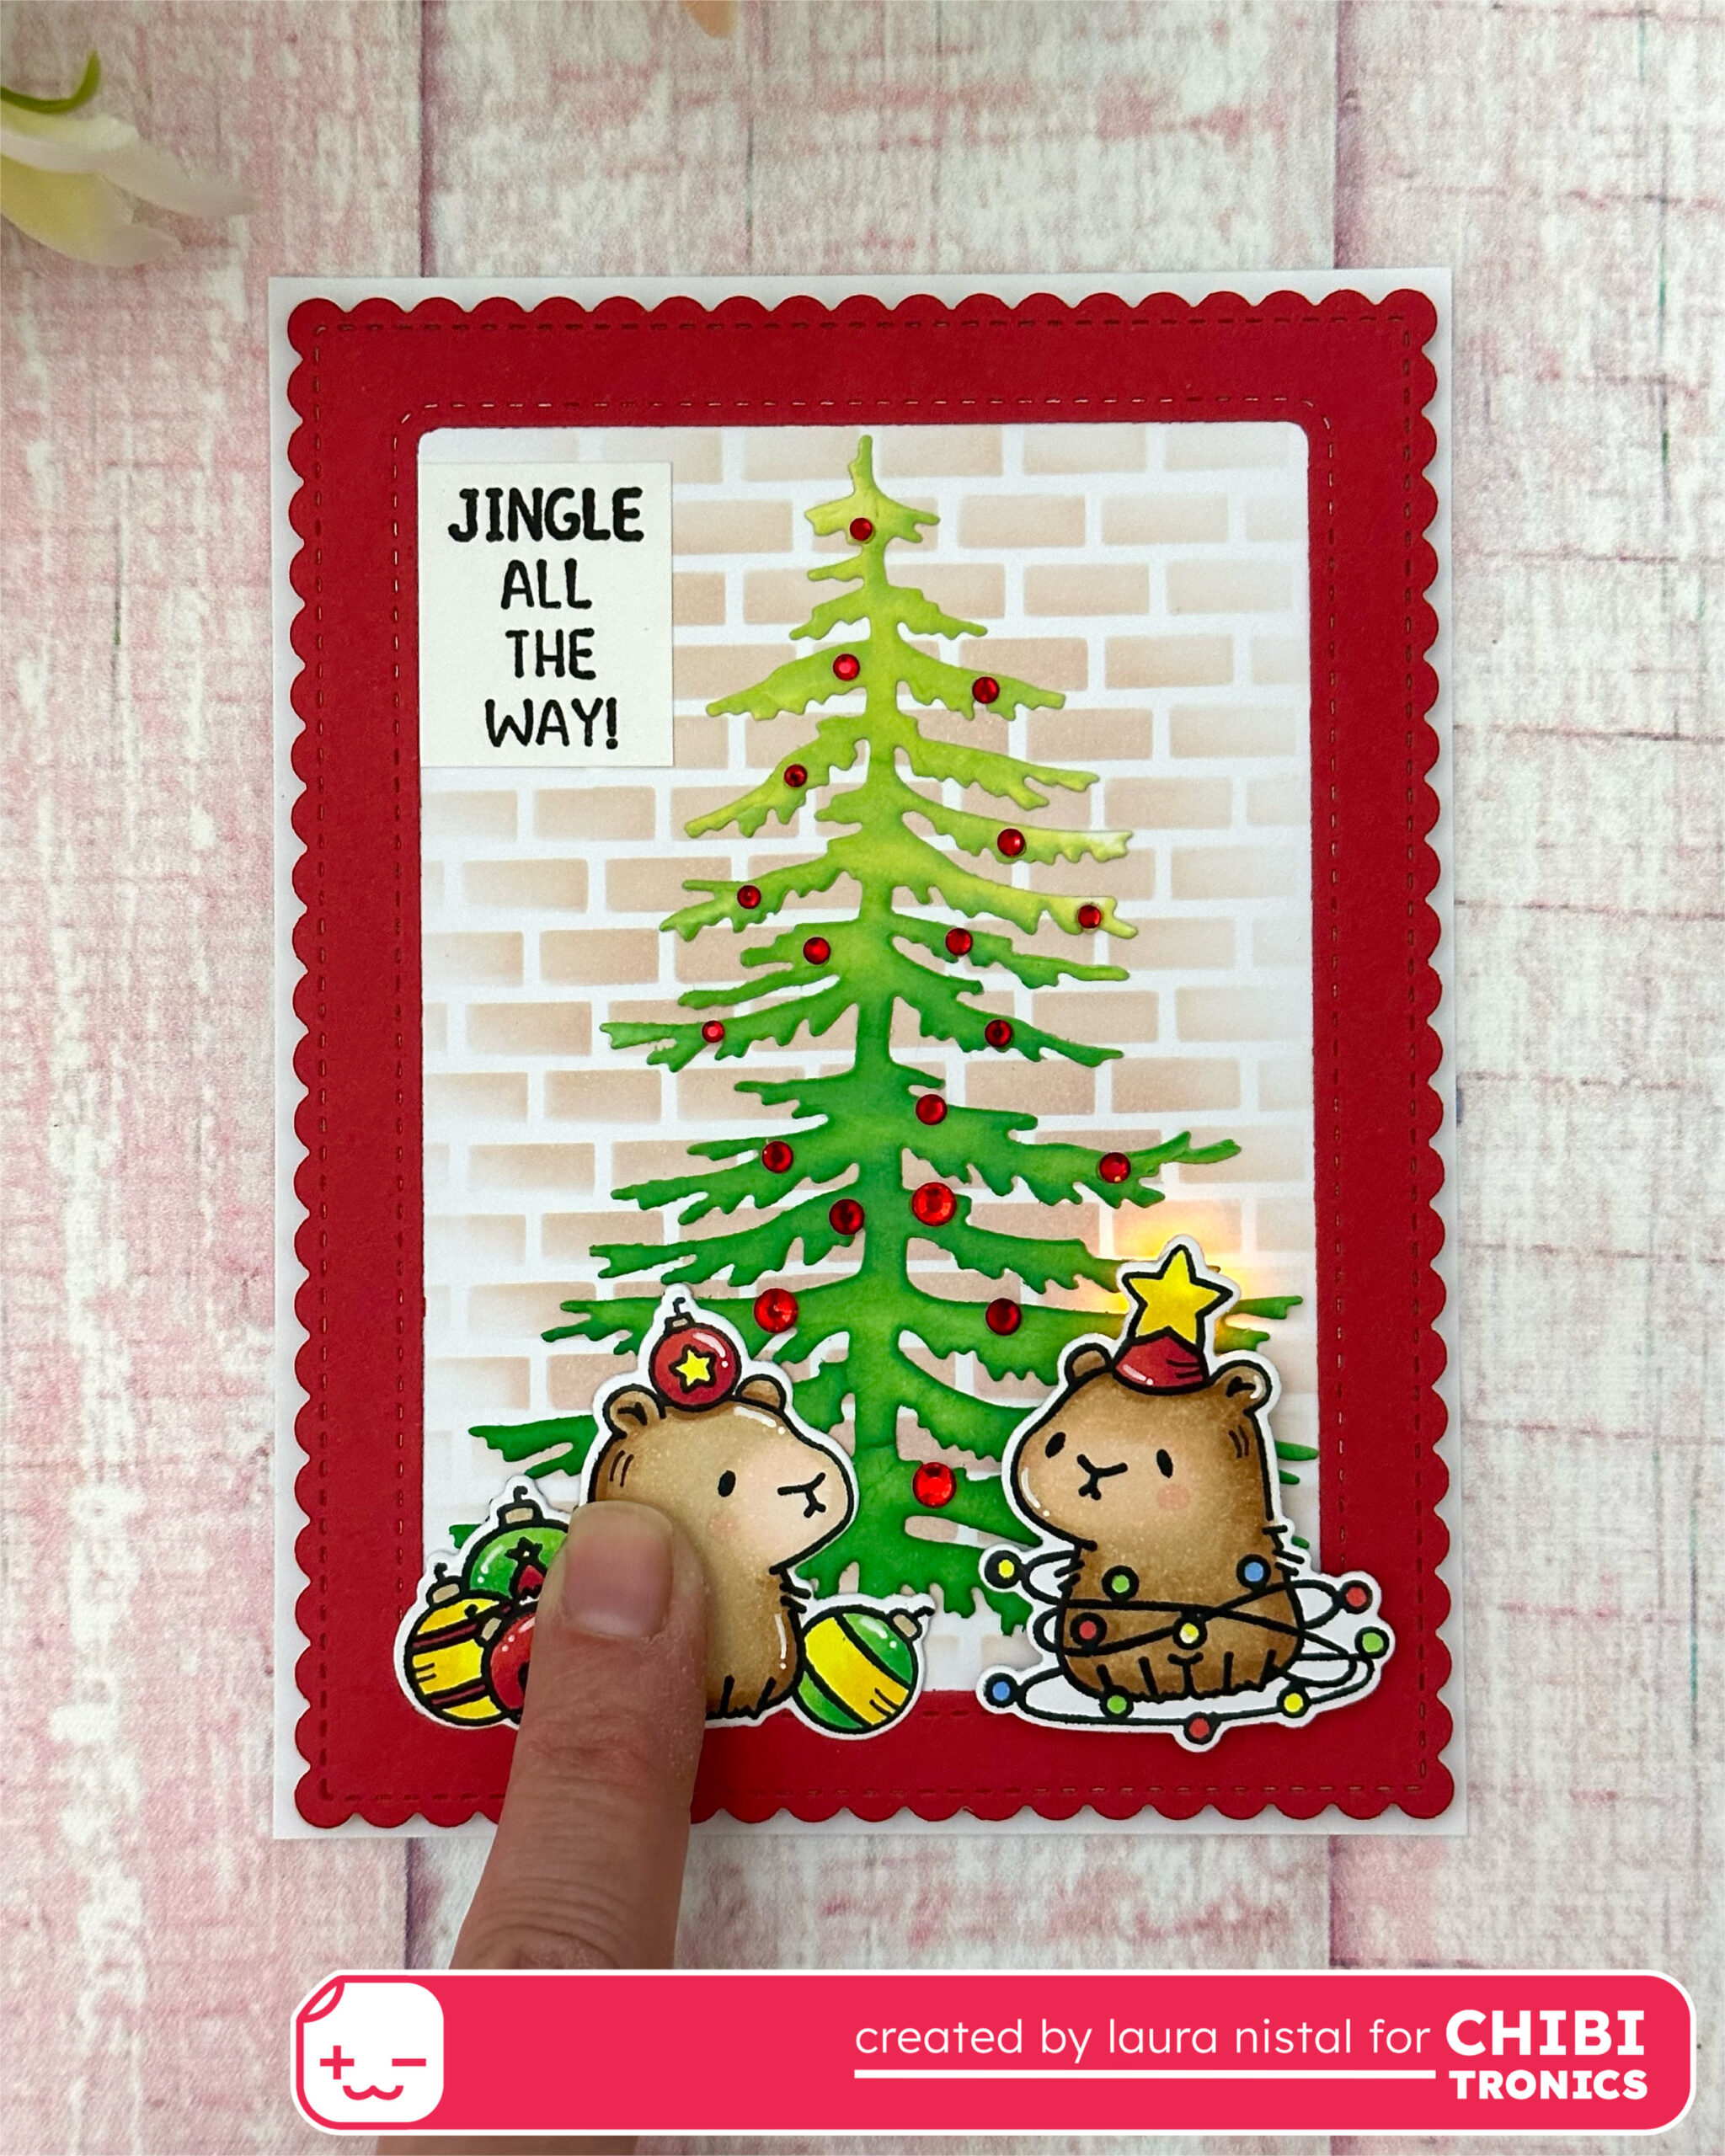 Jingle all the way with Chibitronics LEDs Stickers